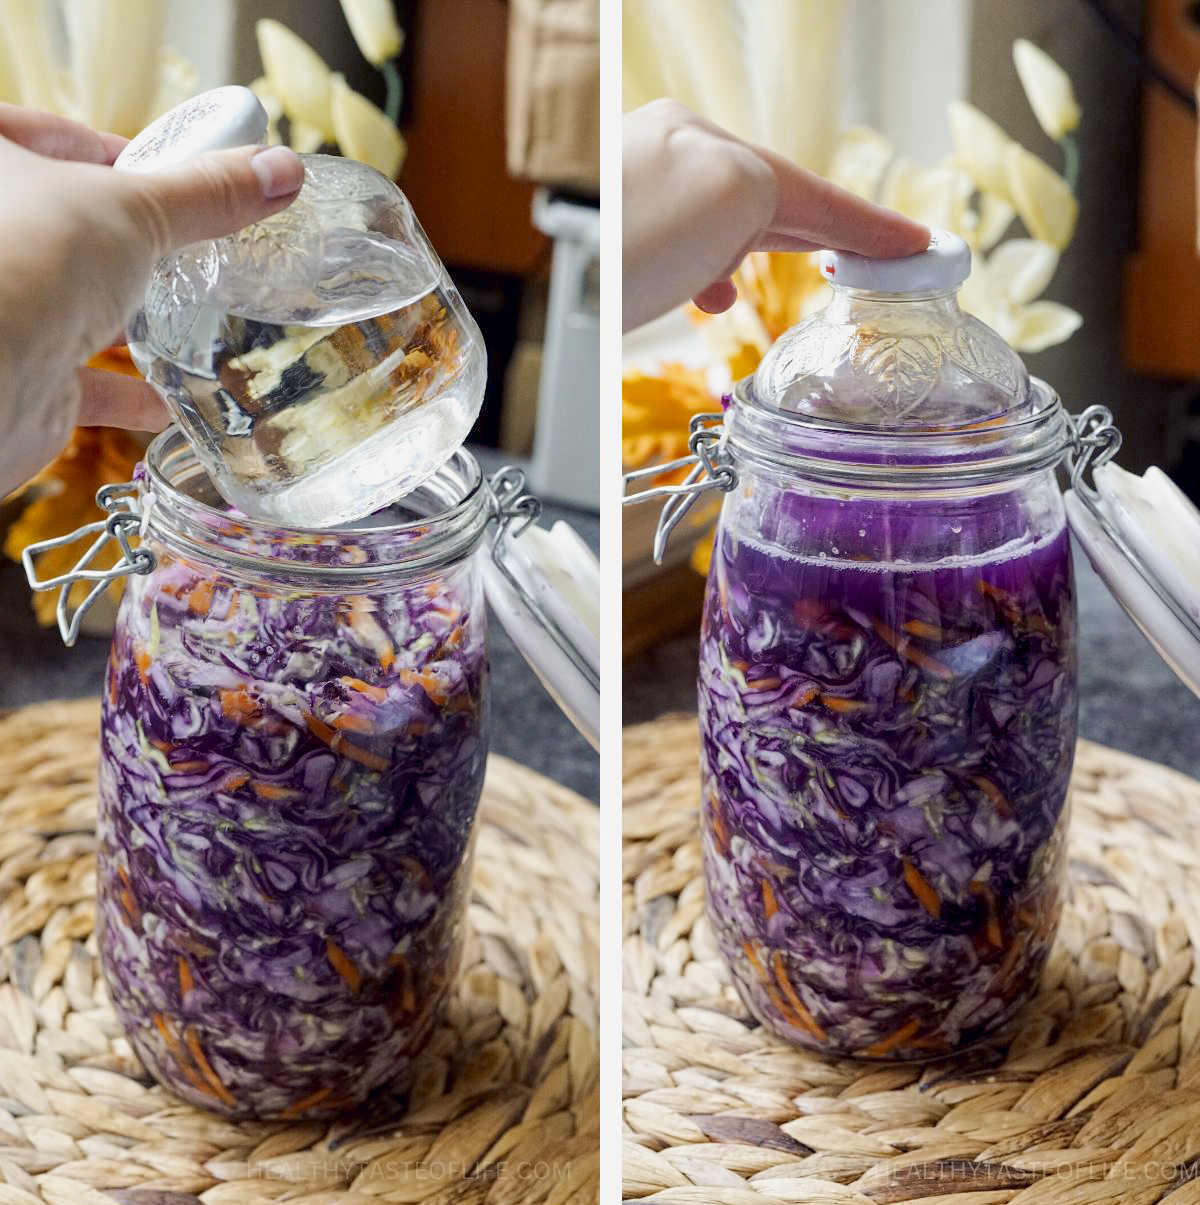 Process shots showing how to place weight on sauerkraut to release juice when storing.